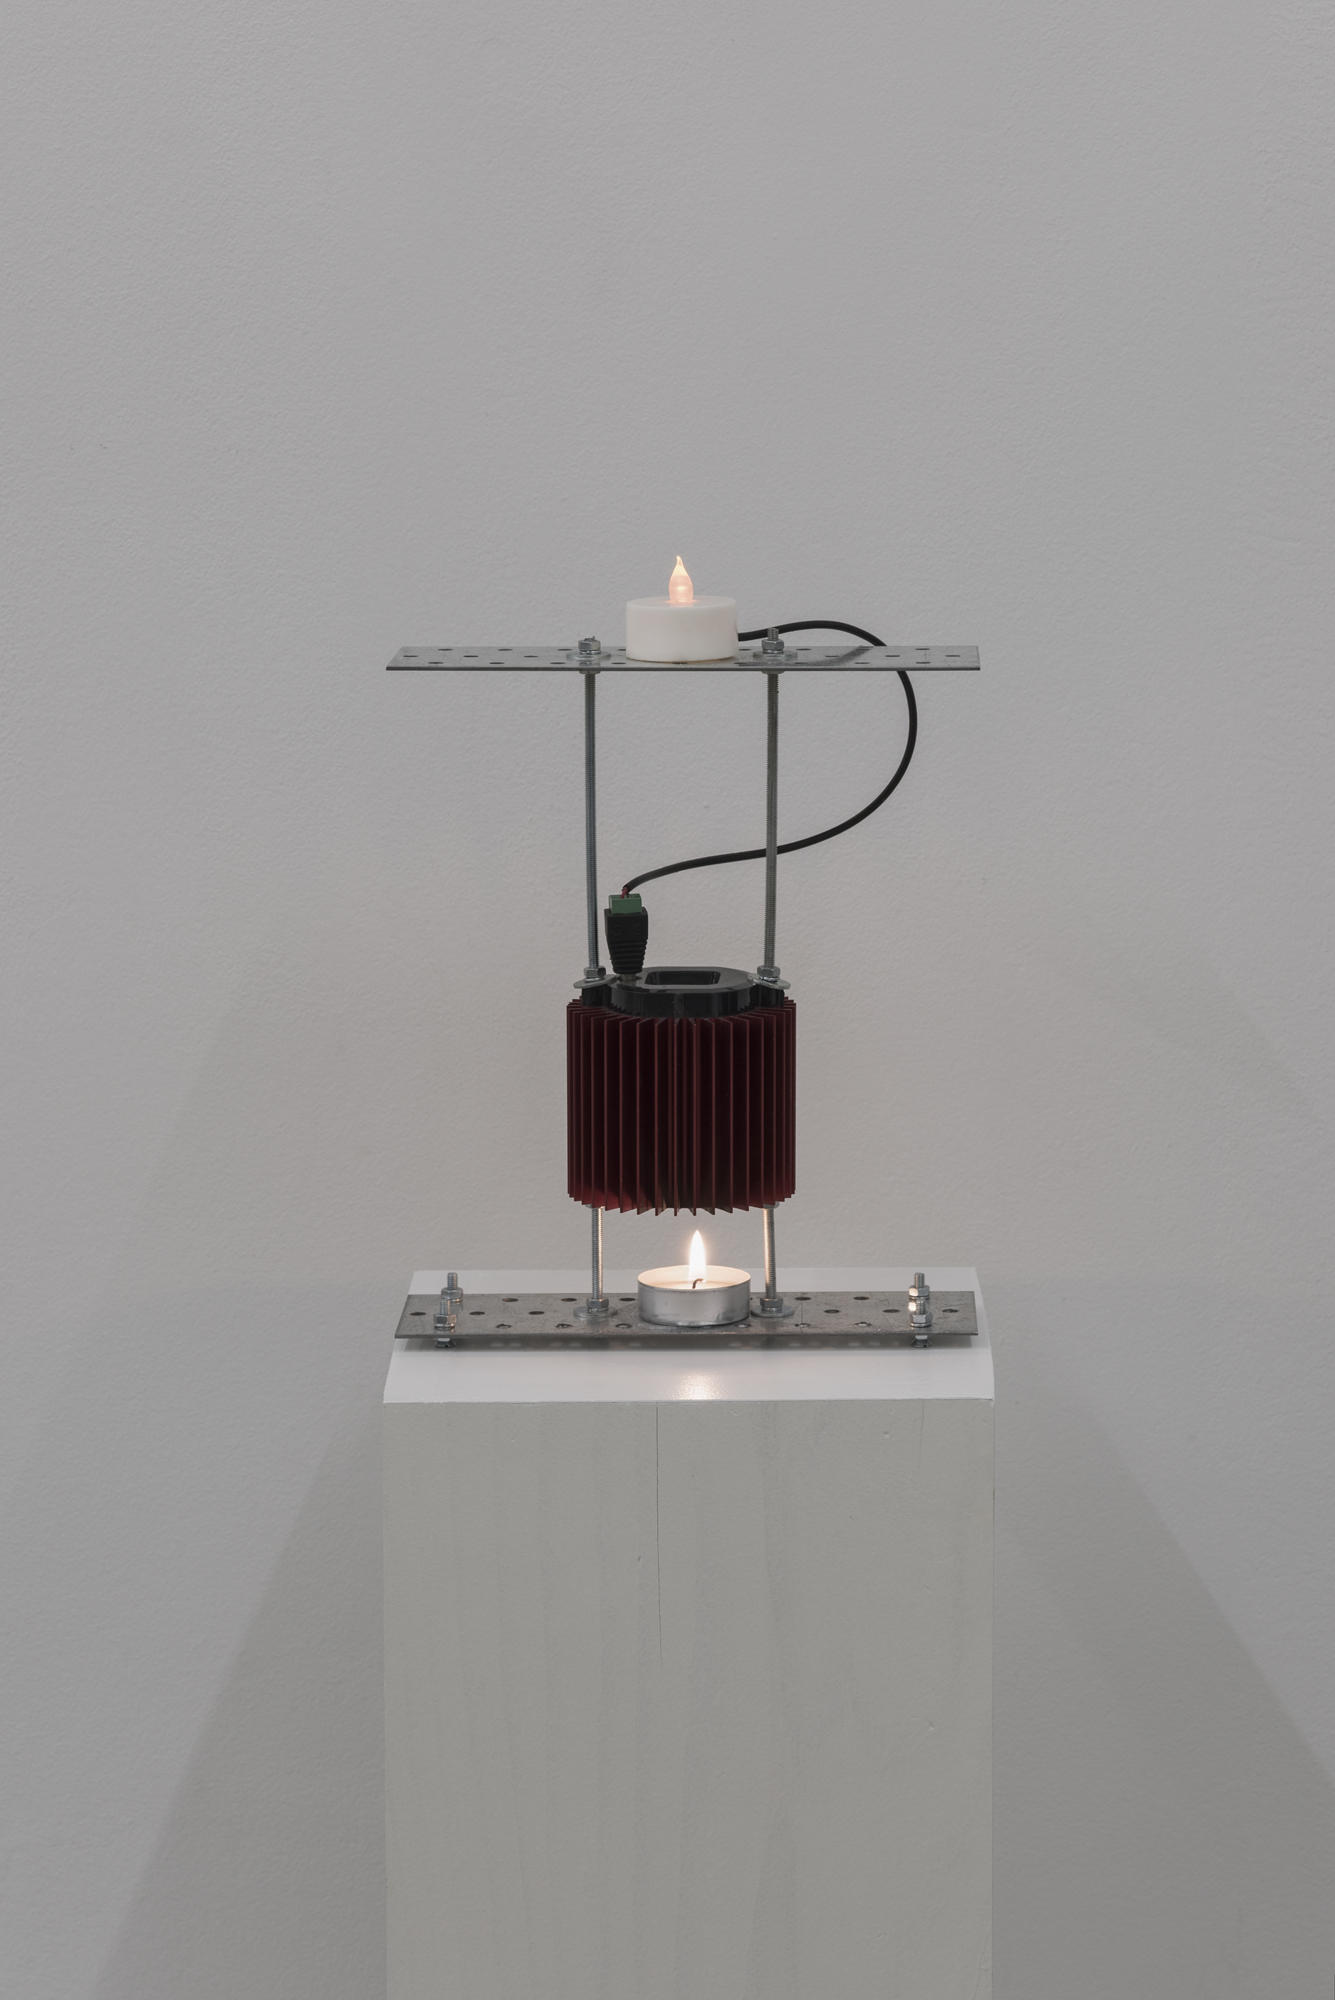 Vadim FISHKIN, Prometheus electronic (candle version), 2013, candle, thermoelectric generator, electric candle, 30 x 20 x 6 cm